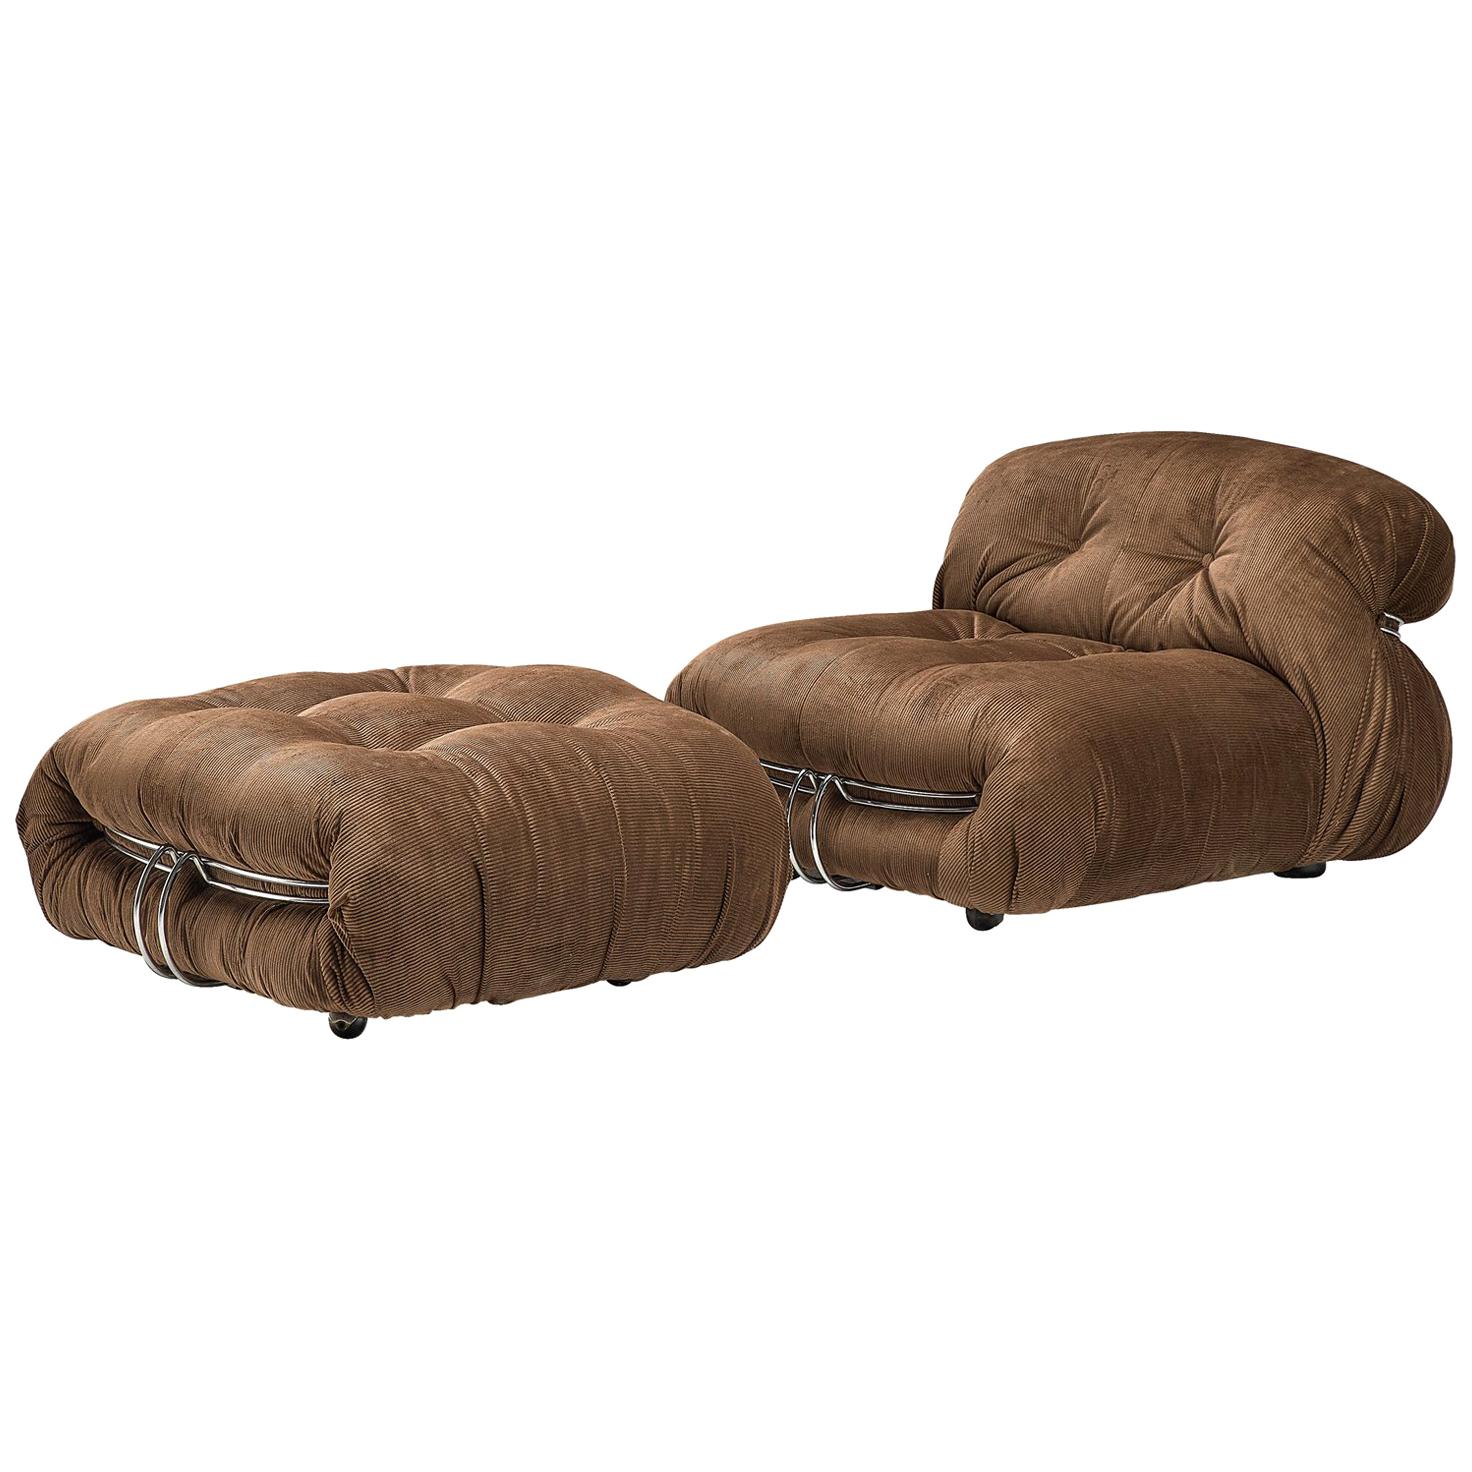 Scarpa 'Soriana' Lounge Chair with Ottoman in Brown Fabric